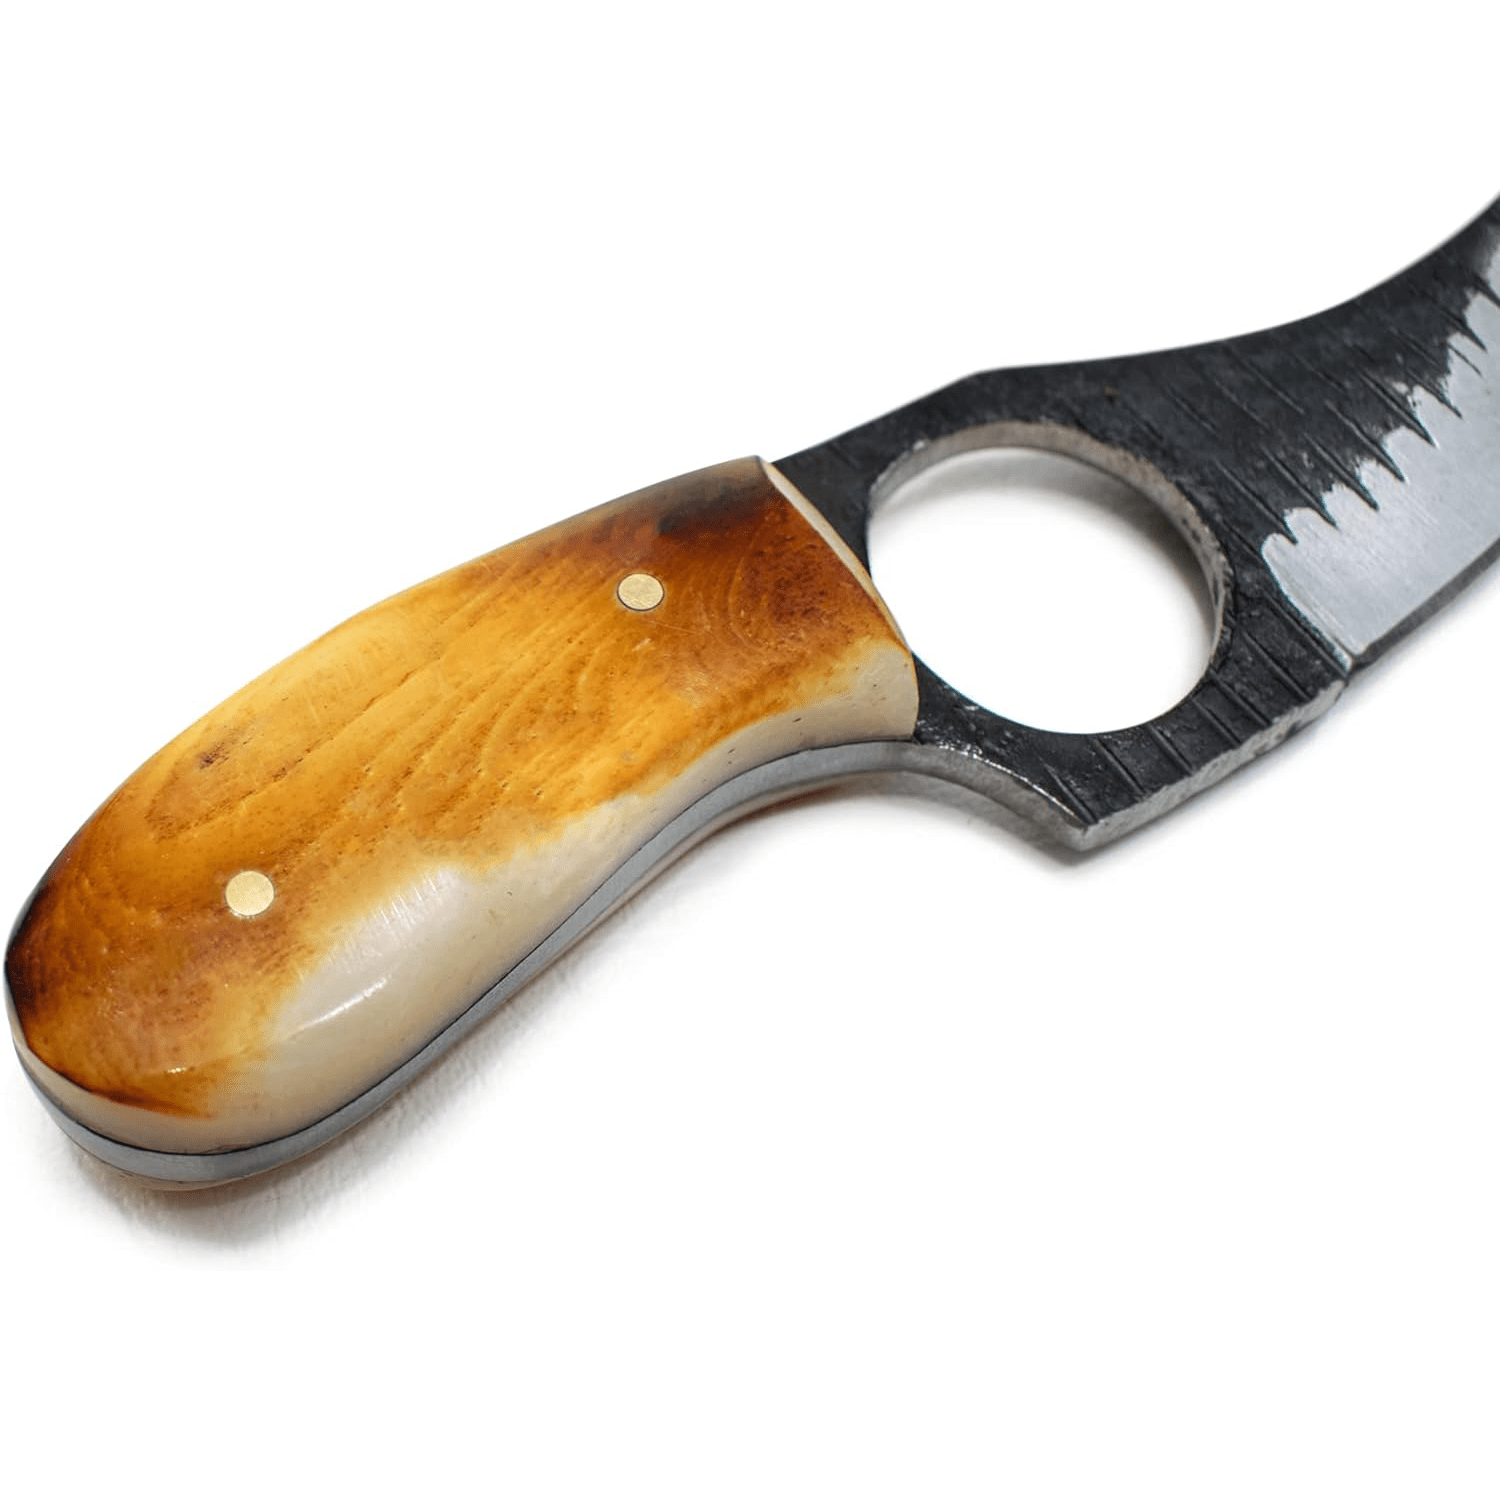 Fixed Blade knive